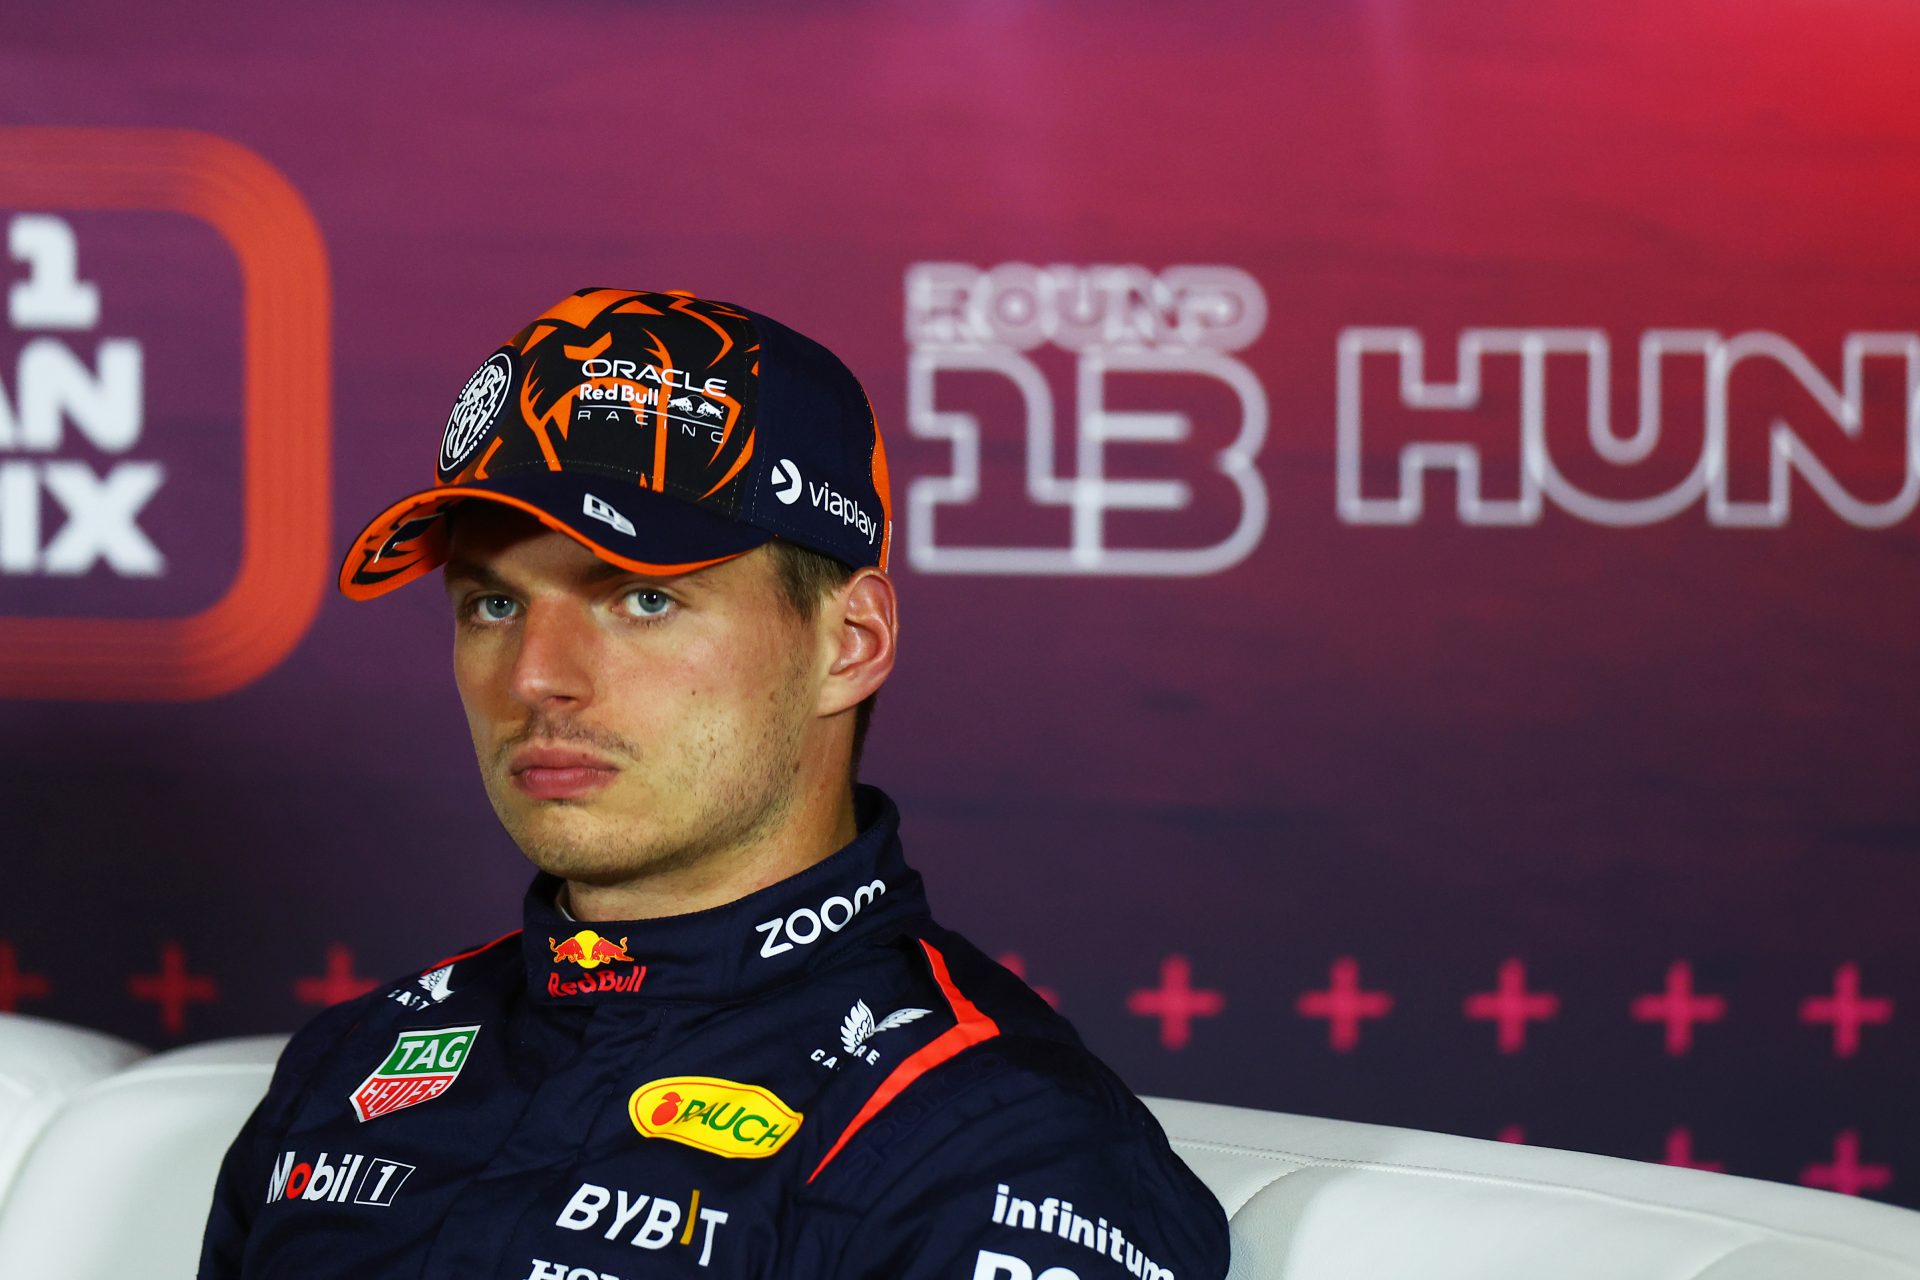 'This has to stop!': Max Verstappen outraged